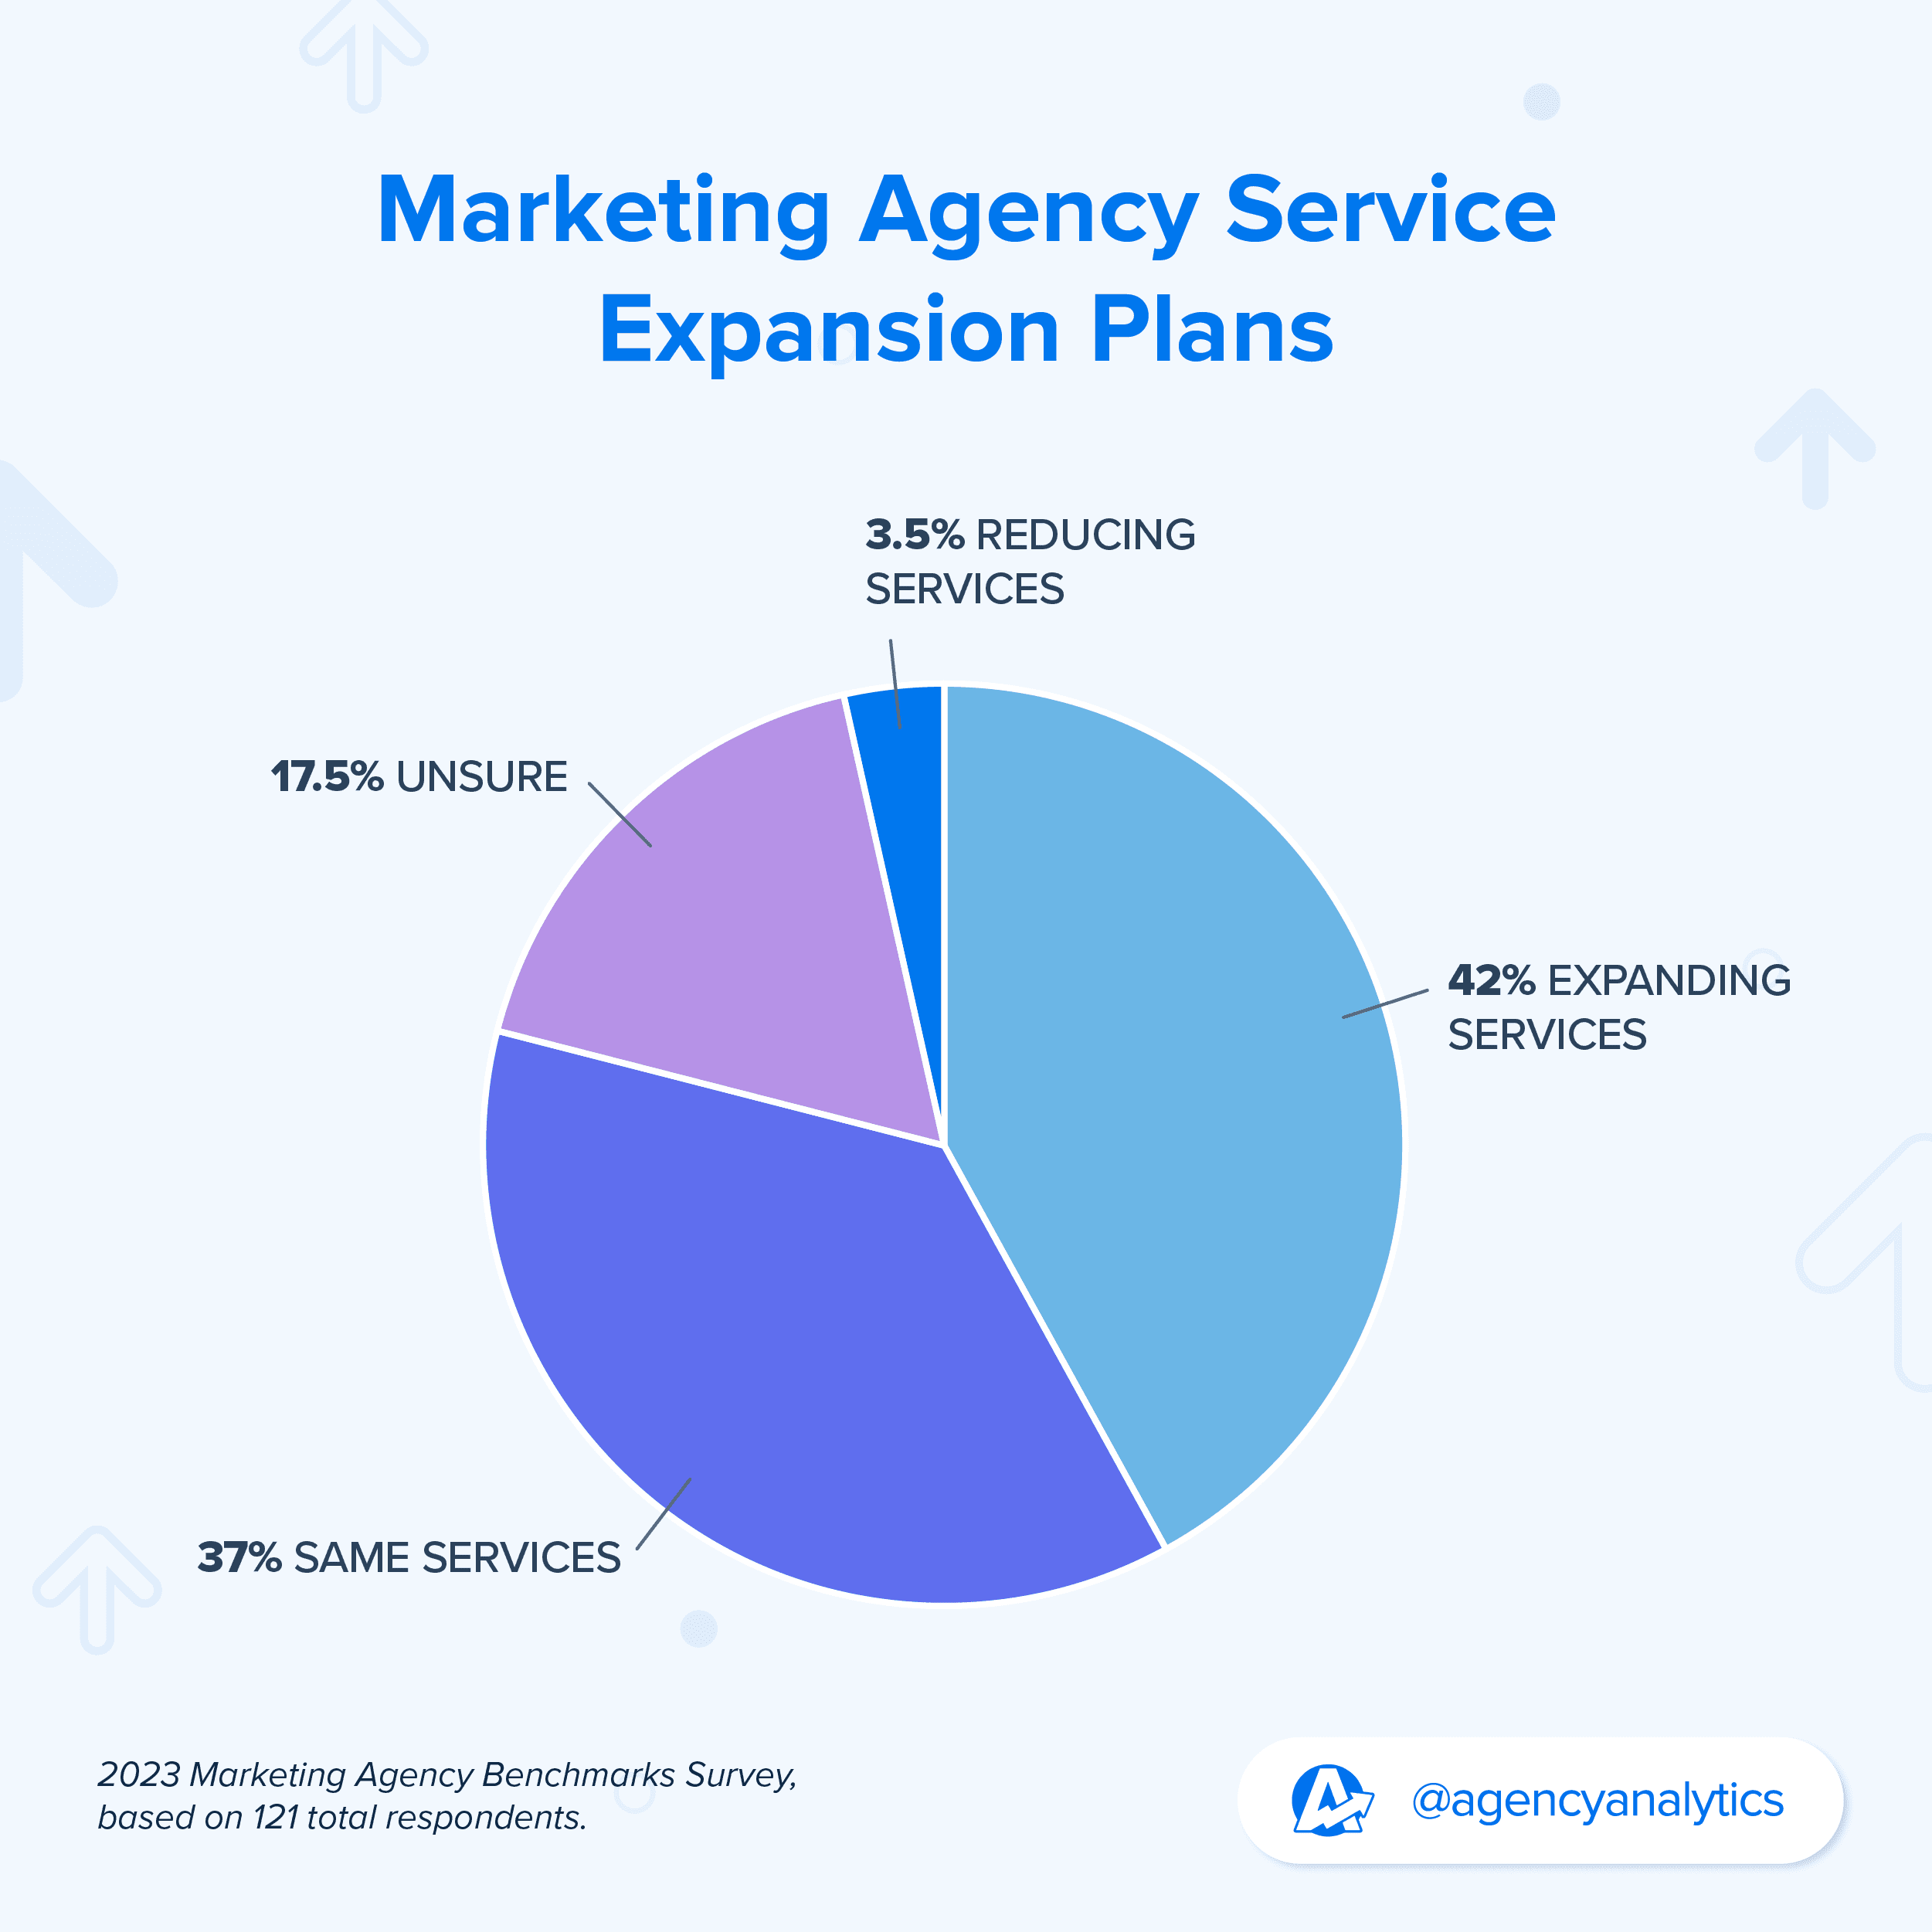 Graph showing marketing agency expansion plans for 2023